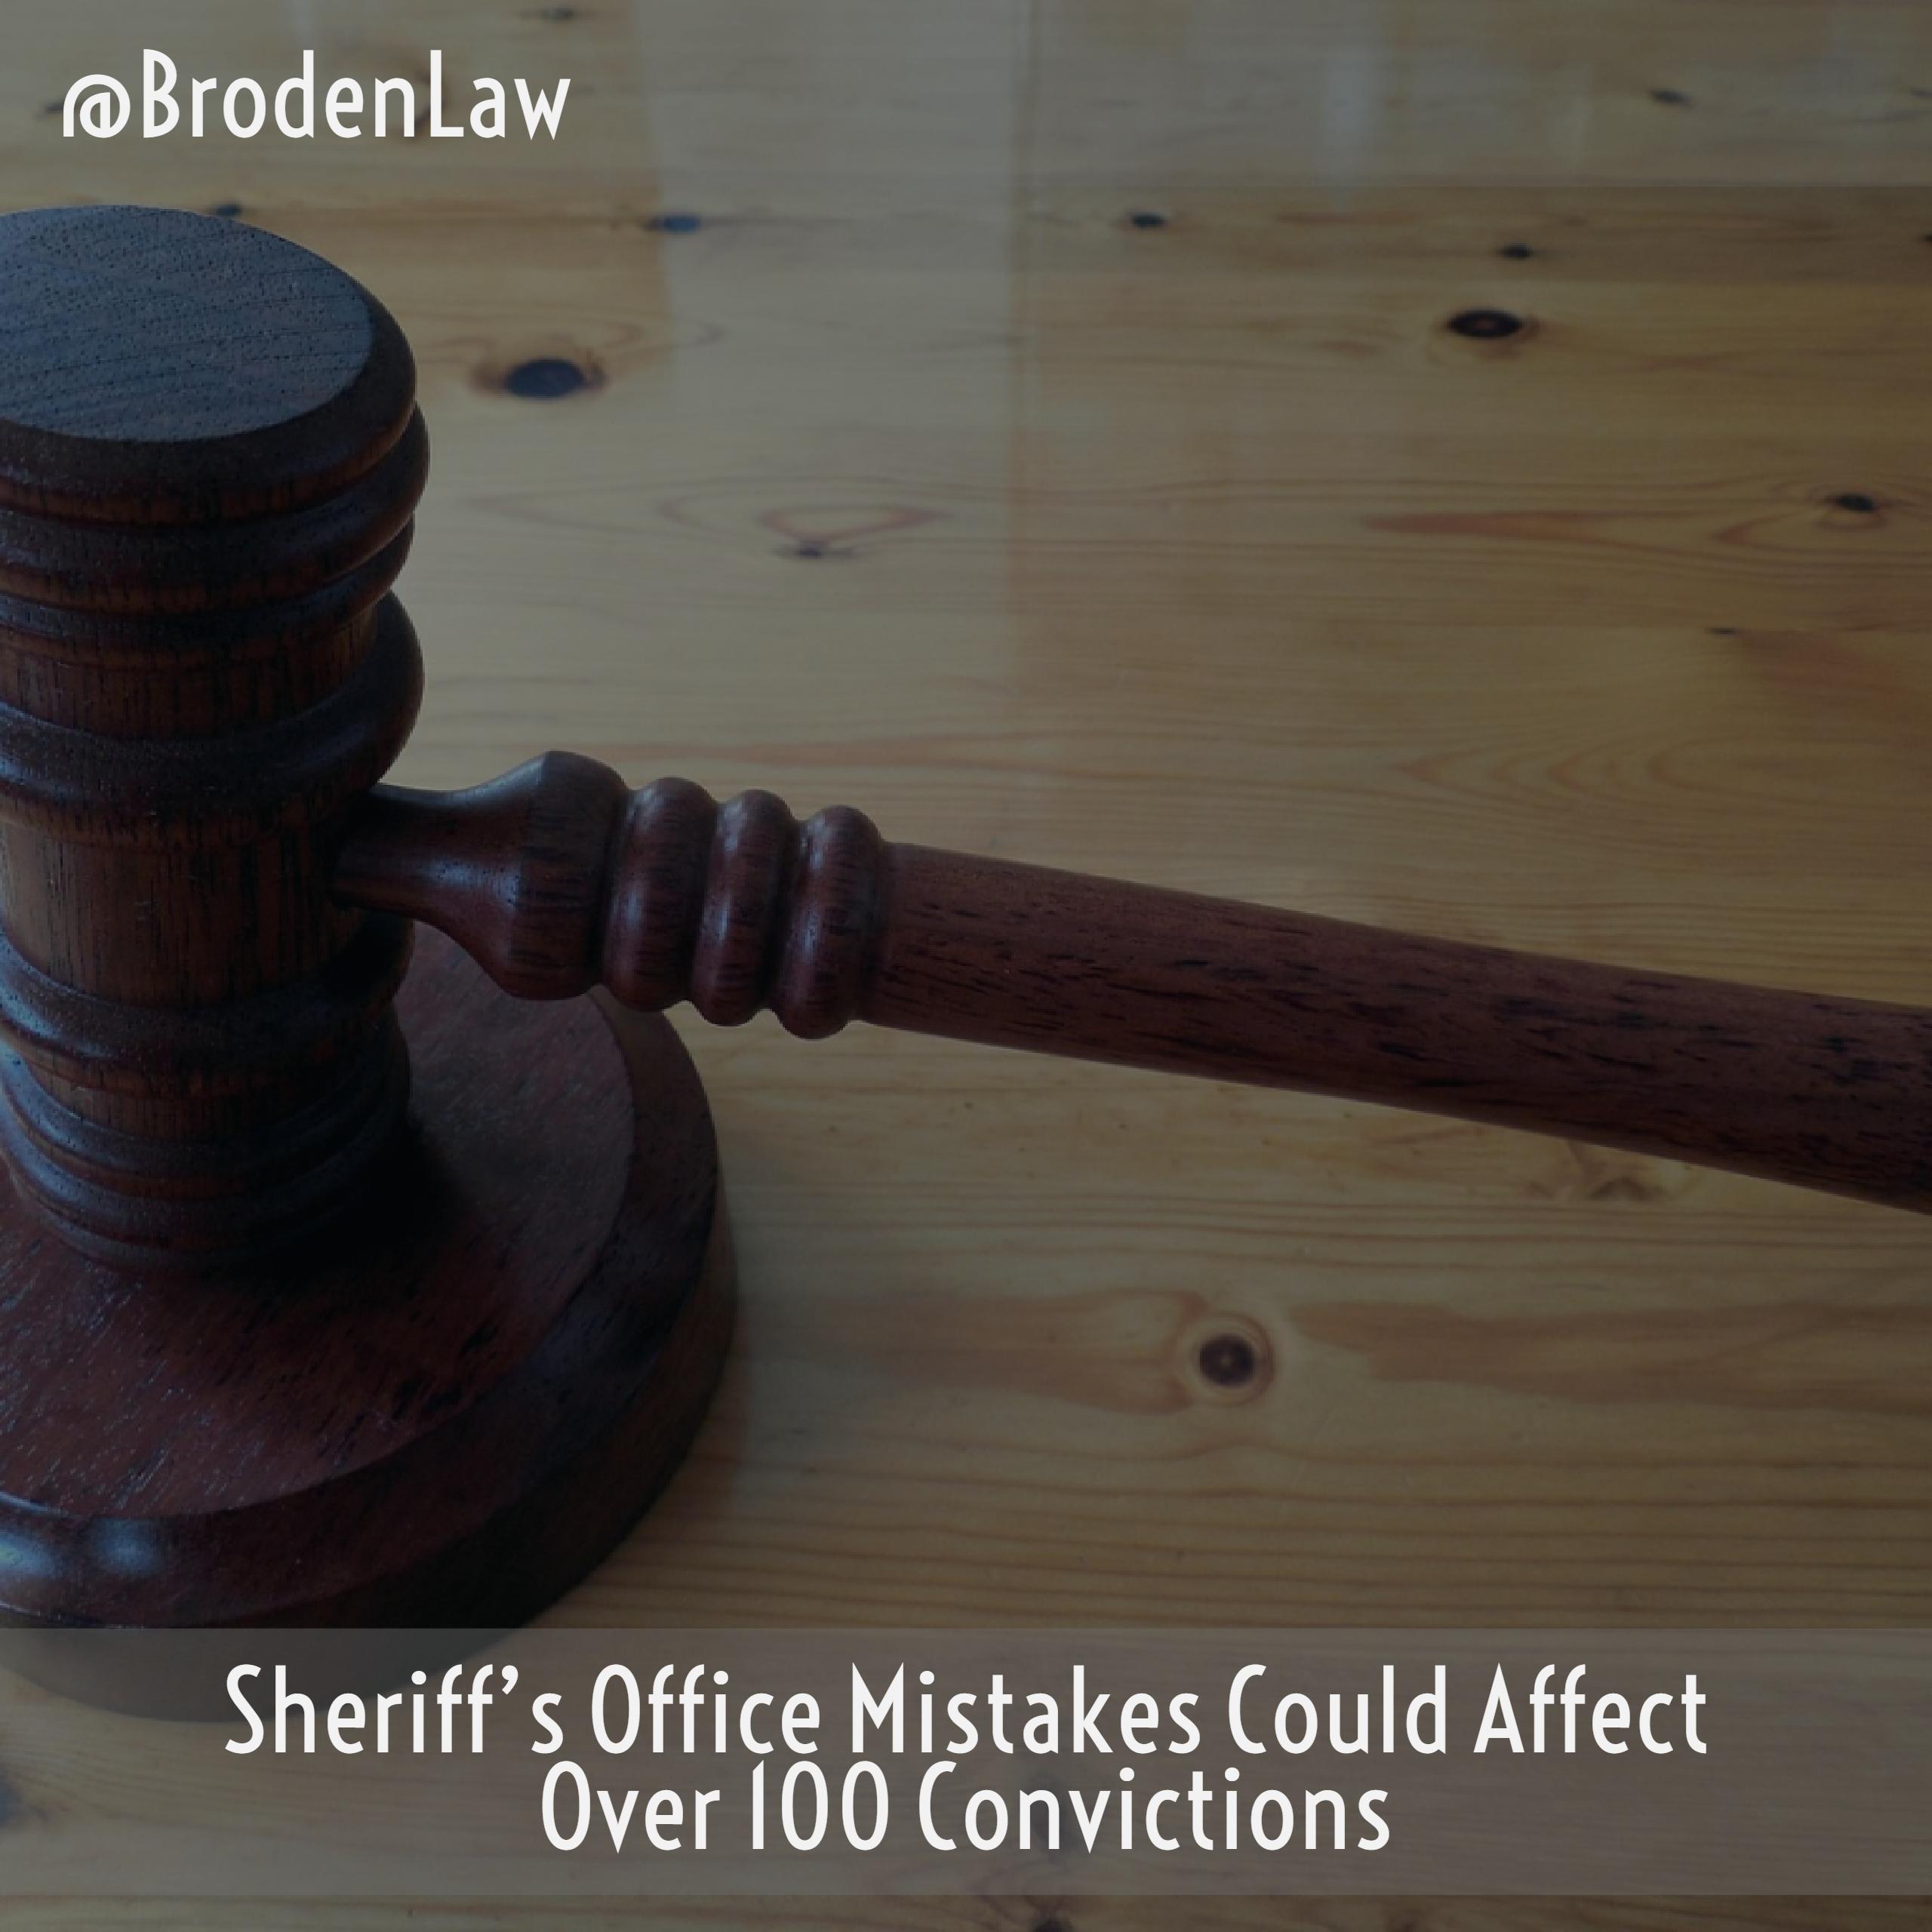 Sheriff’s Office Mistakes Could Affect Over 100 Convictions